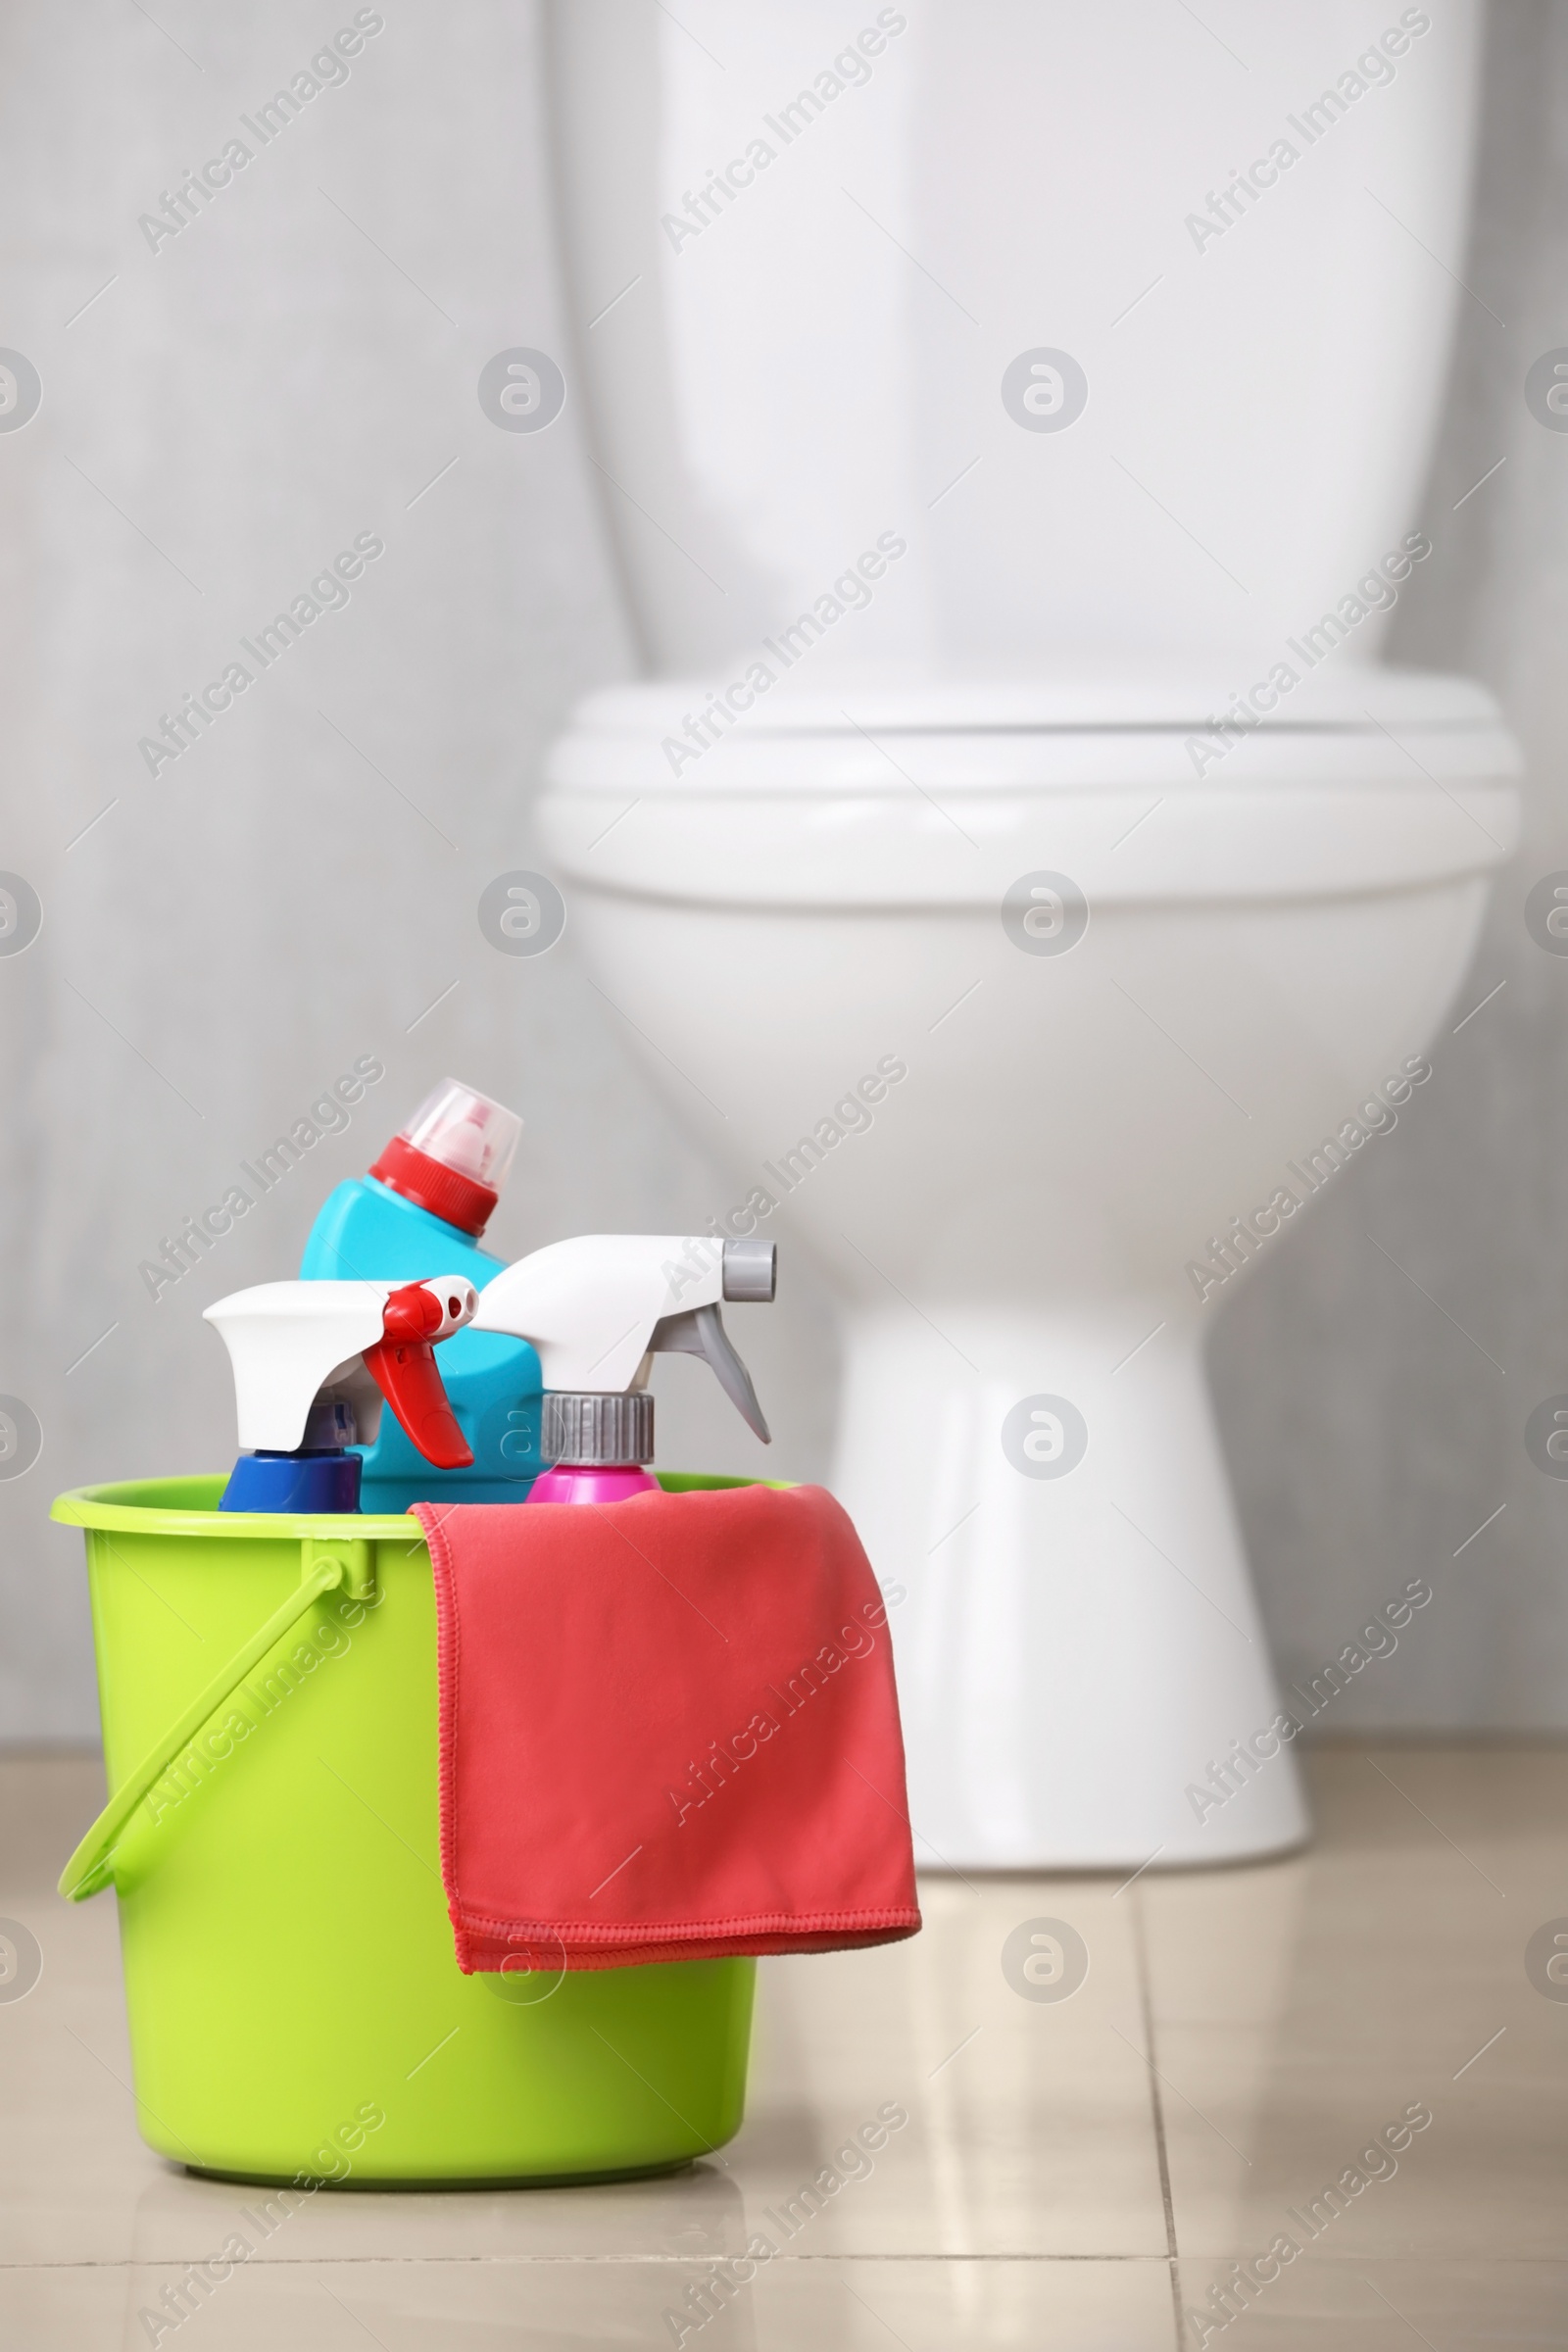 Photo of Bucket with toilet cleaning supplies on floor indoors